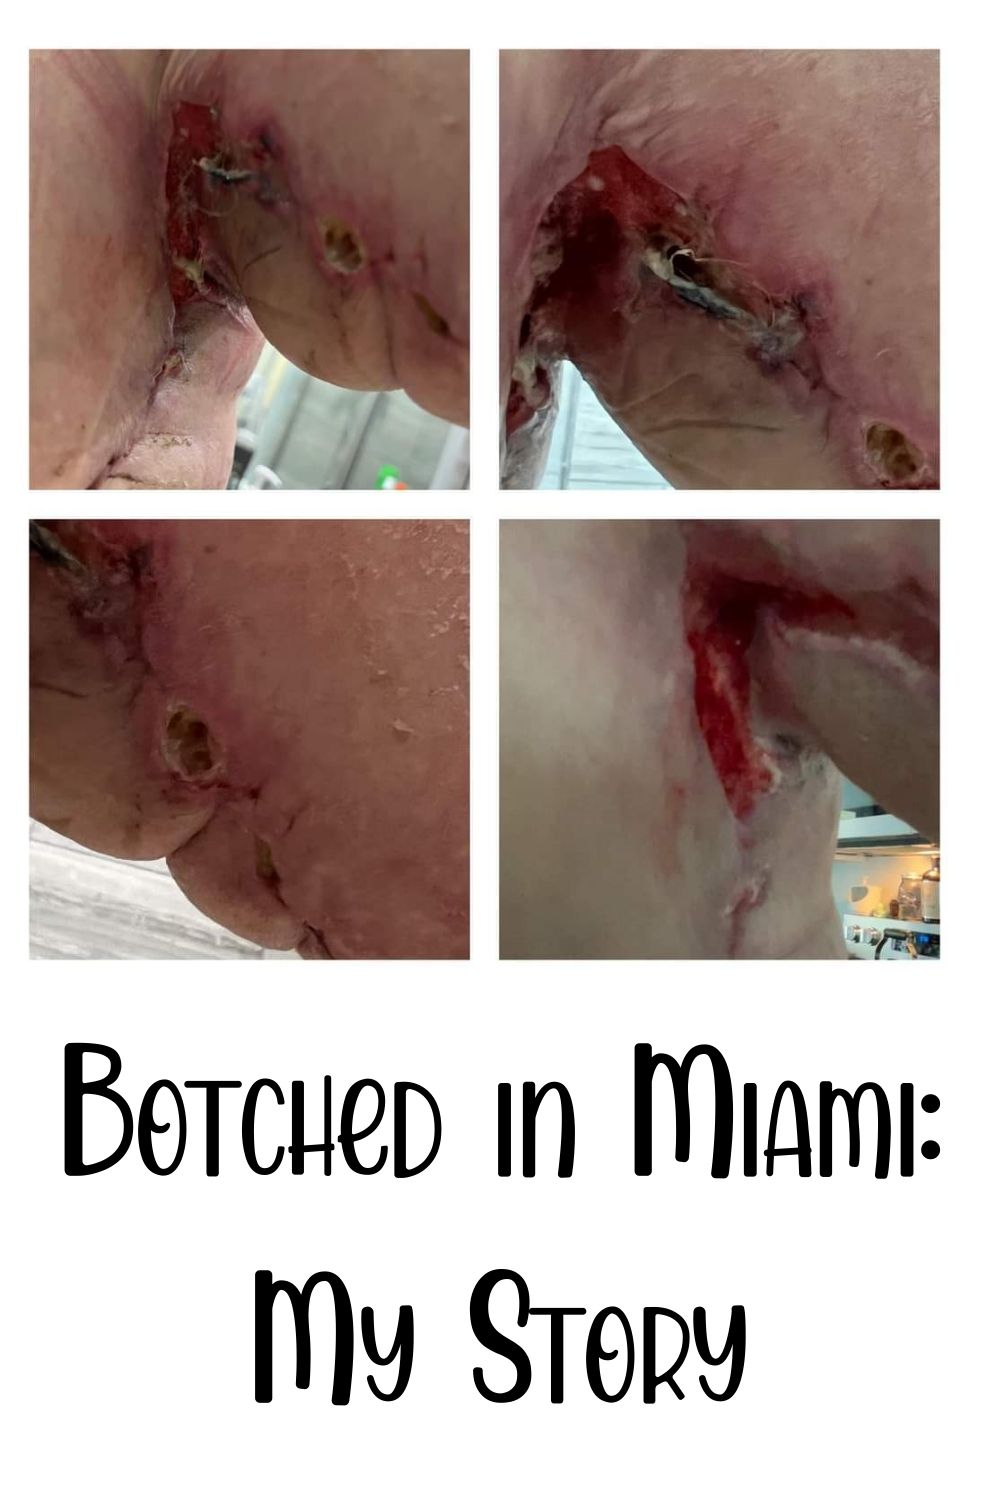 “Botched in Miami”: Ashley P's Story